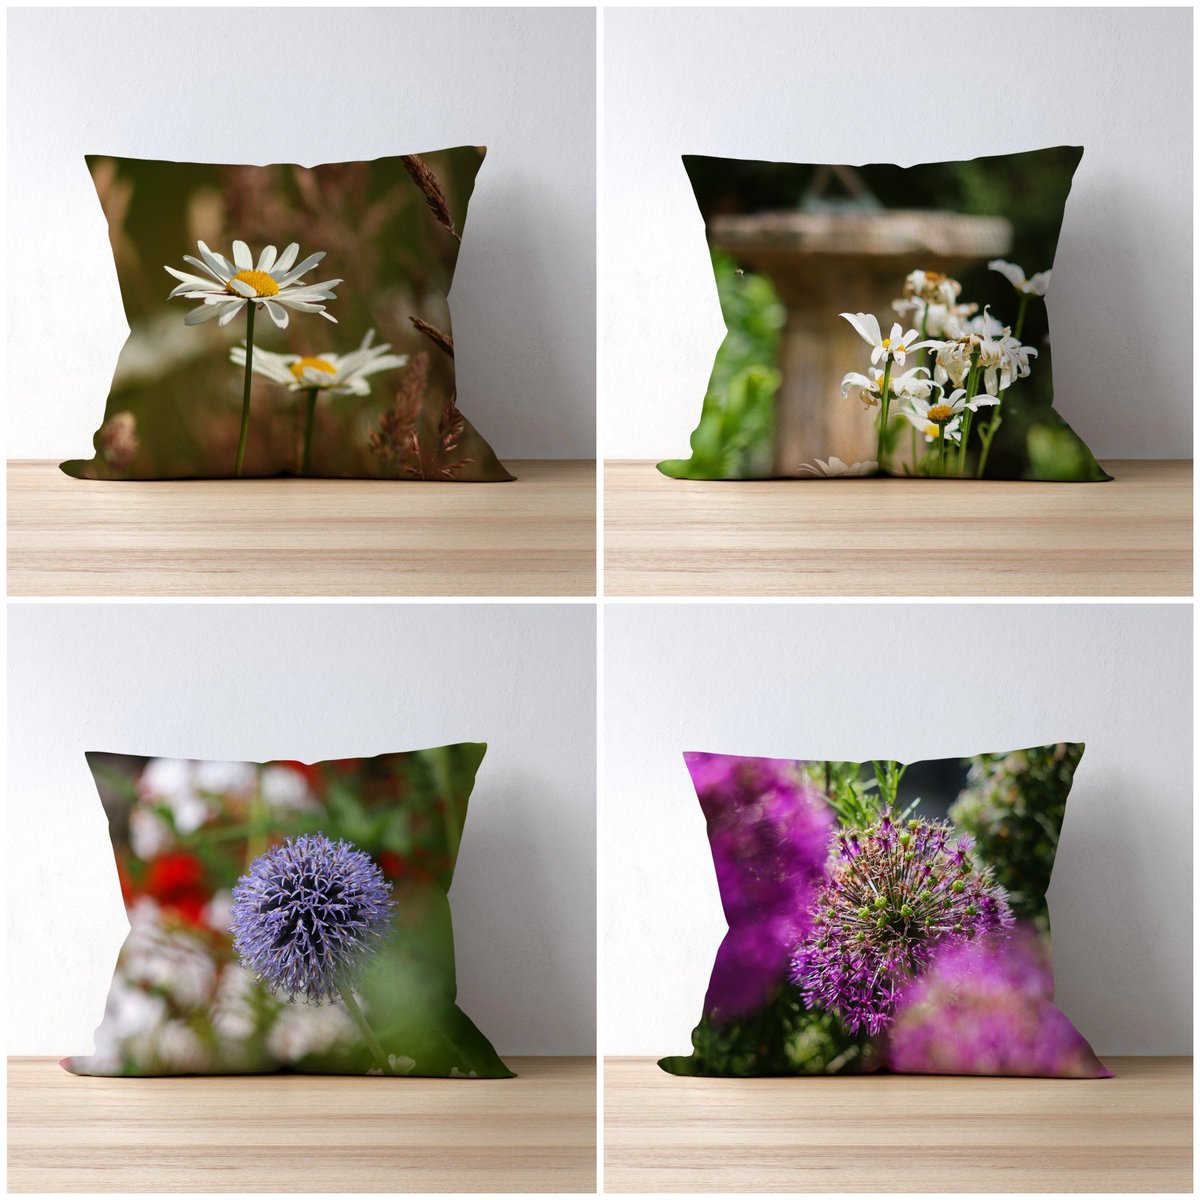 @RReviews_blog Bring the outside in with these beautiful floral cushions from my #etsyshop !  #giftfinder #smallbiz #shopsmall #giftsforgardeners #notonthehighstreet

etsy.me/2Vss0lu